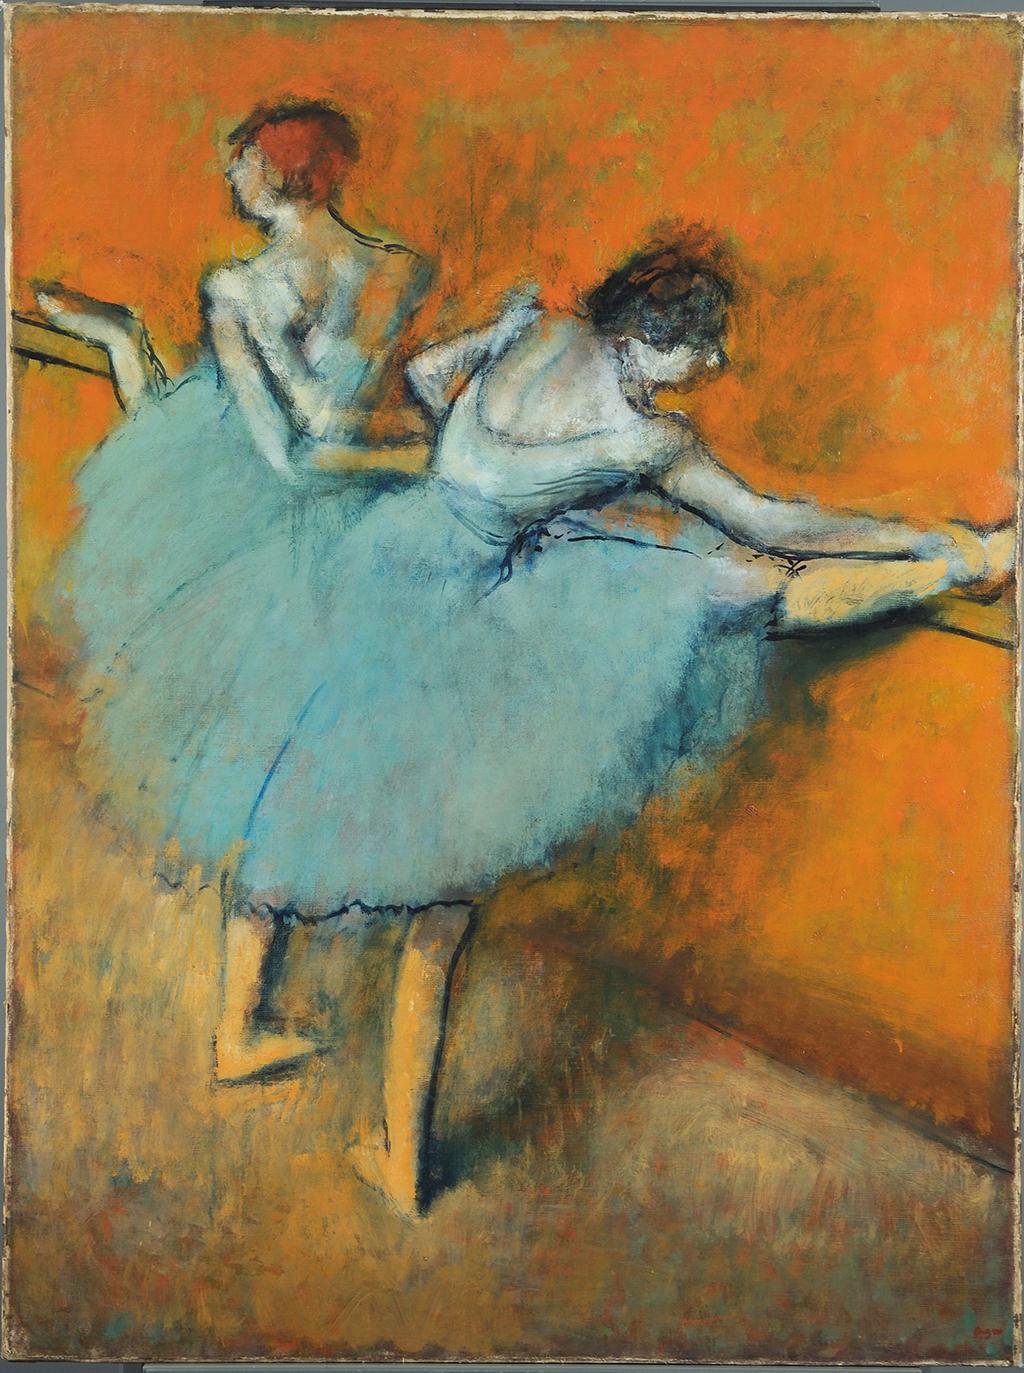 Dancers at the Barre by Edgar Degas - circa 1900 - 38.5 x 51.25 in The Phillips Collection